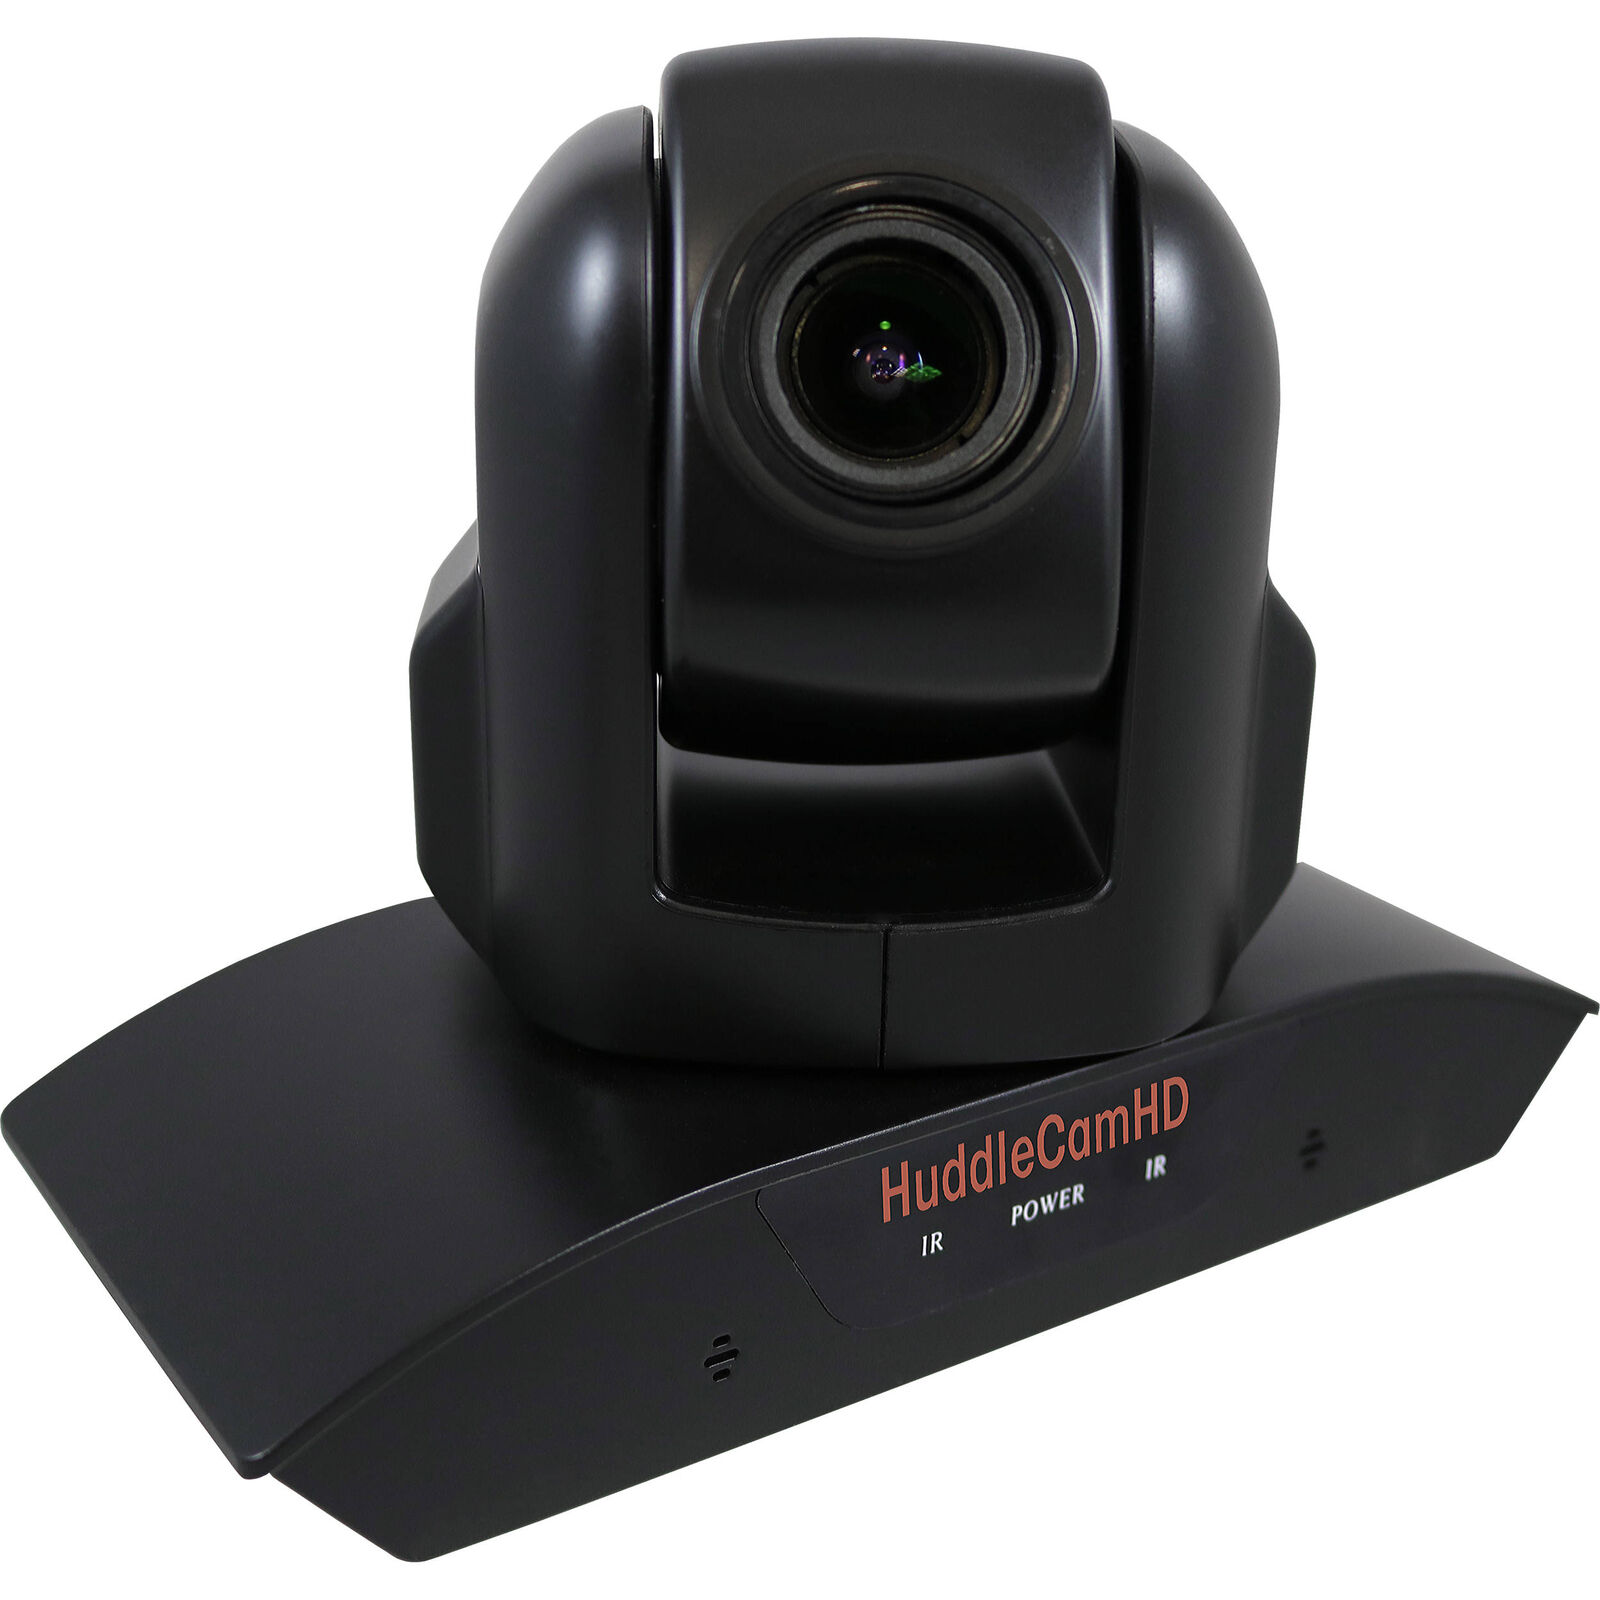 HuddleCamHD USB Conference Cameras with PTZ Control 3X Optical Zoom, 1920 x 1080